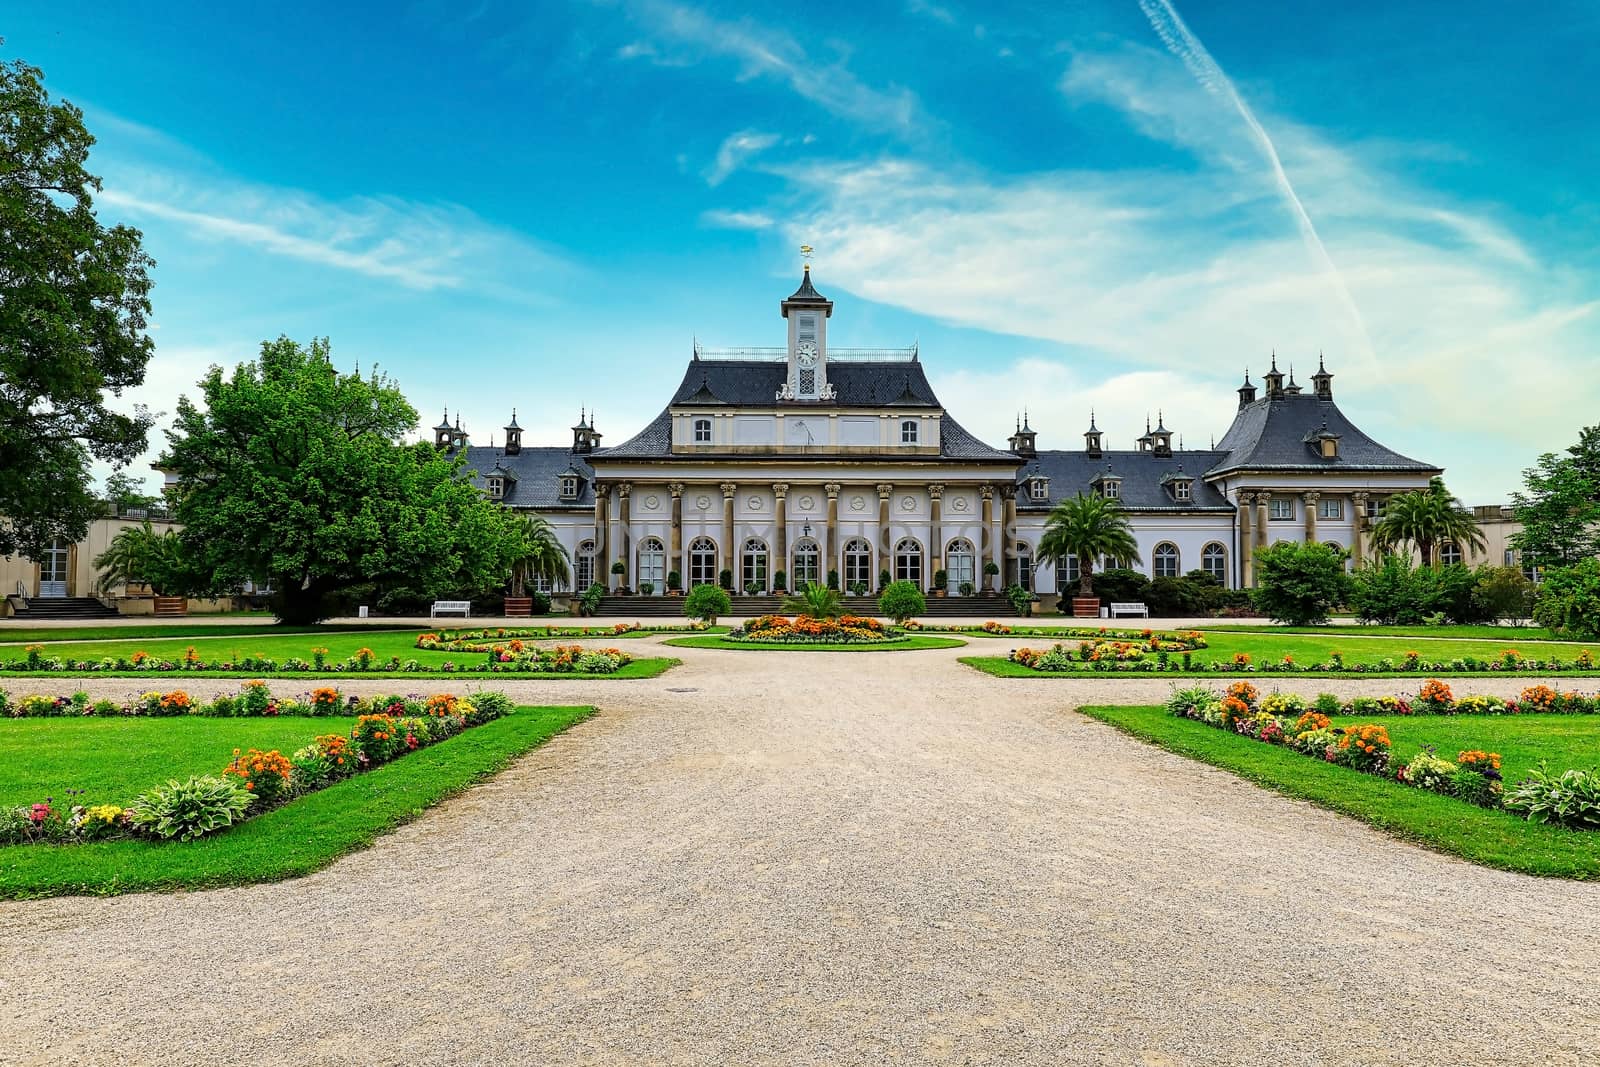 The New Palace in Pillnitz Castle near Dresden, Germany, Europe by seka33